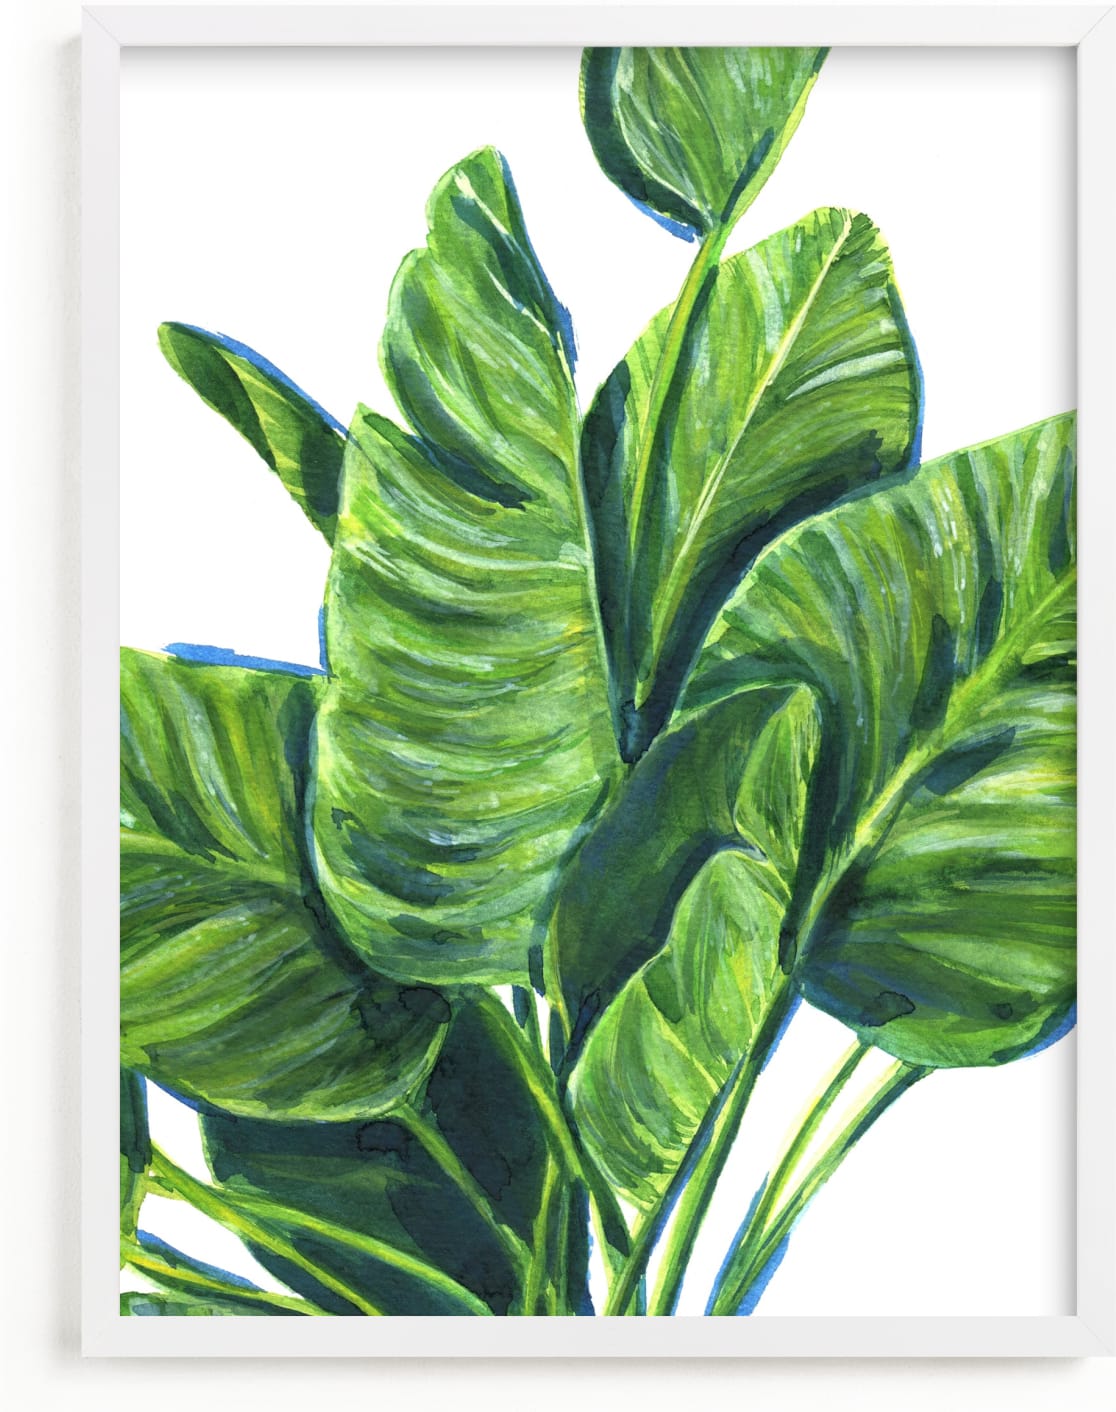 This is a blue art by Alexandra Dzh called Tropical plants II.